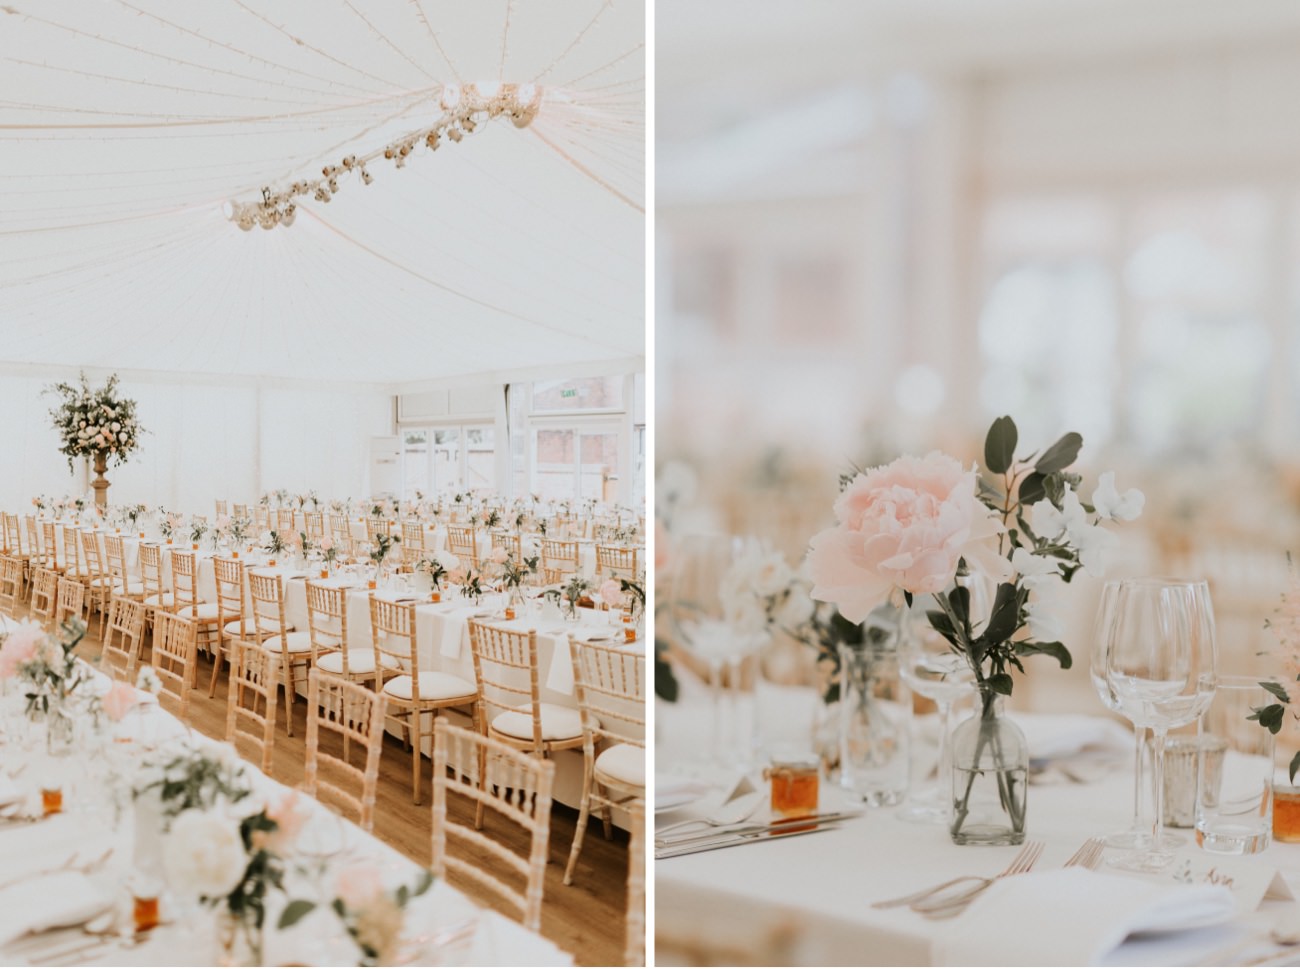 Fulham Palace wedding photography, The marquee set for the wedding breakfast